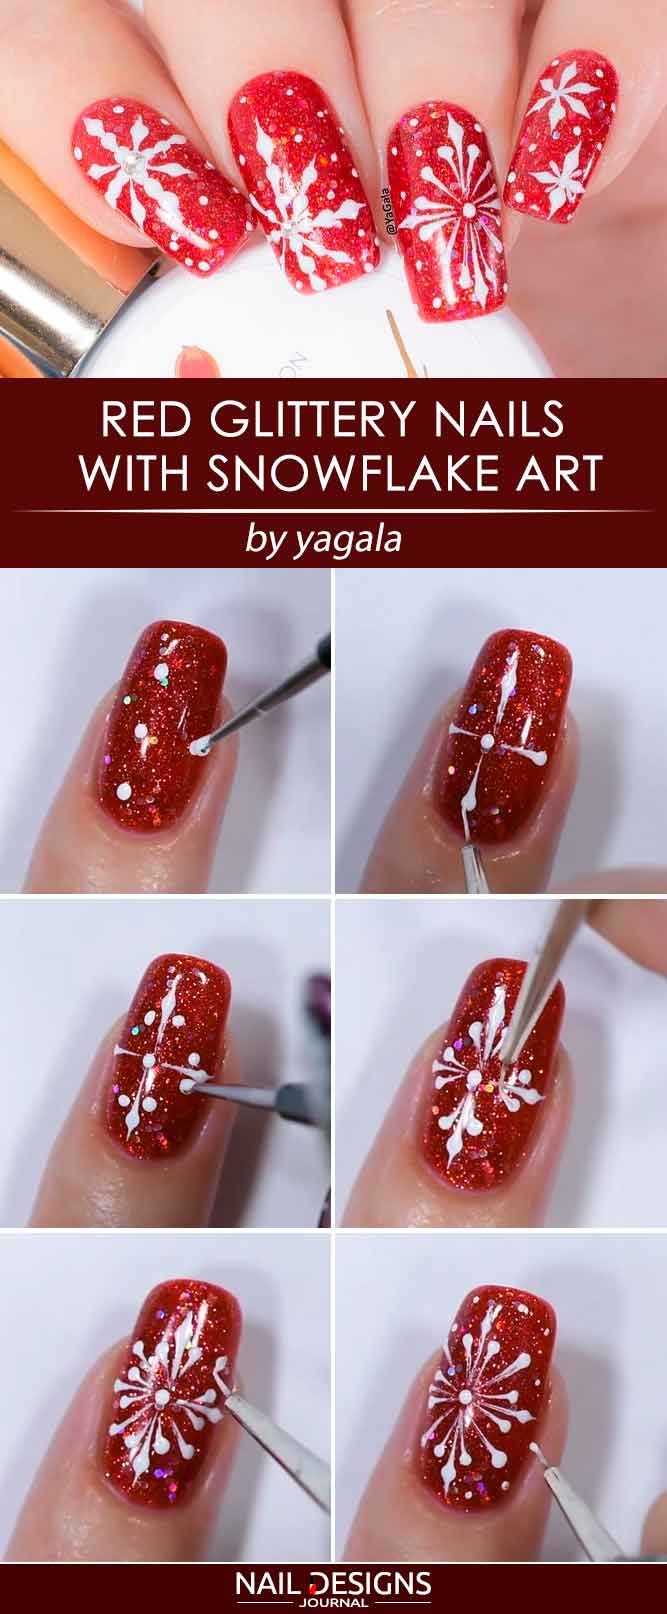 Red Glittery Nails with Snowflake Art